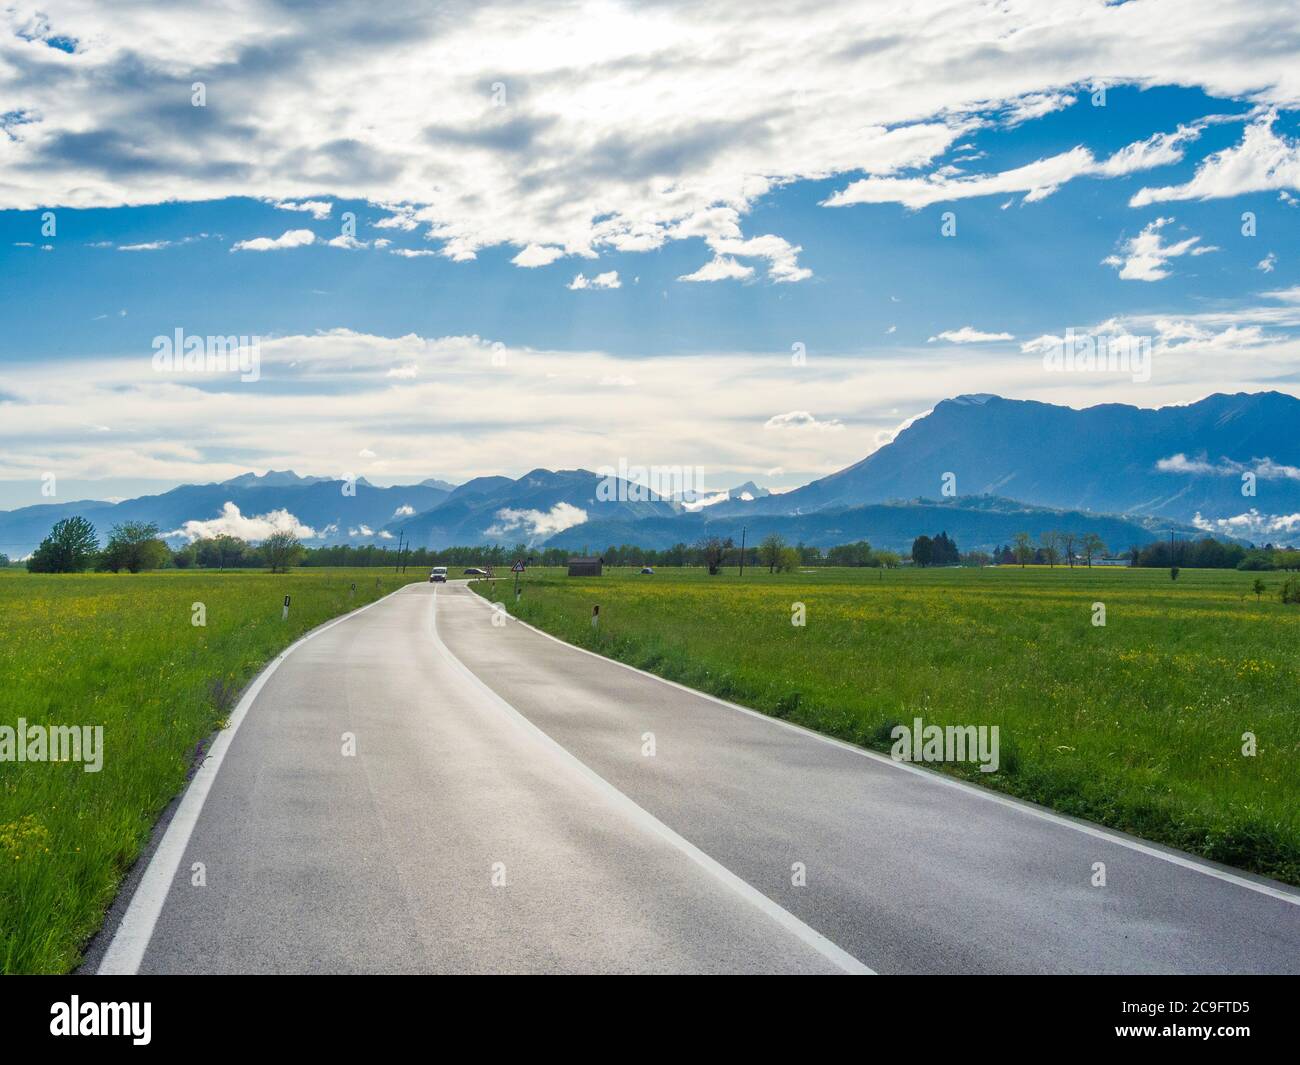 Italy countryside landscape with green grass, road and mountains. Wet asphalt road in Italy countryside. Pordenone, Friuli Stock Photo